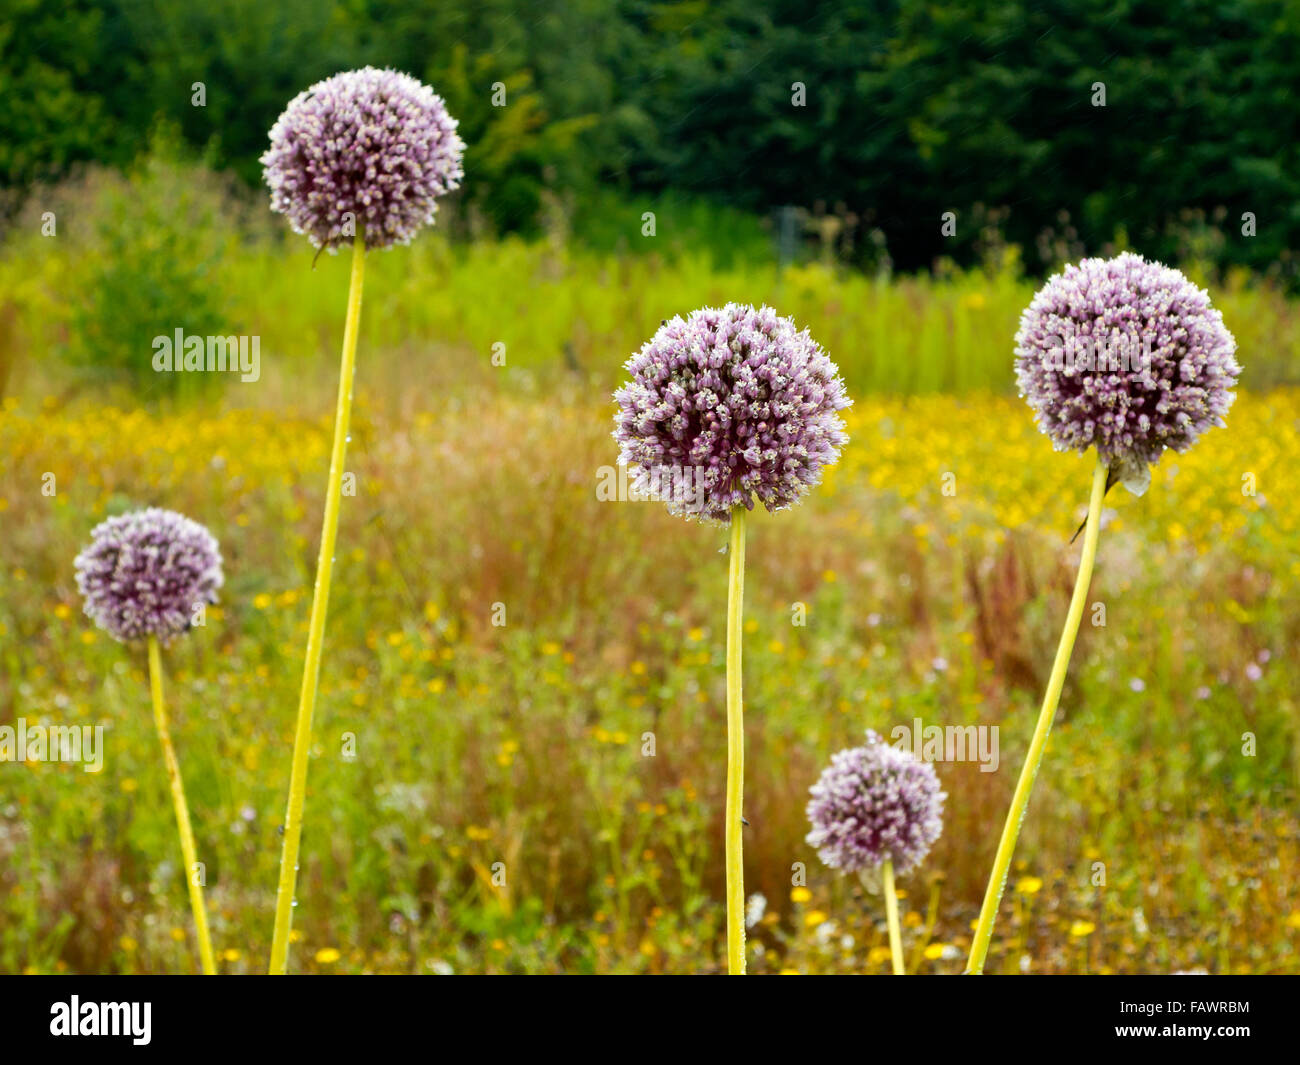 Flowers of Allium sativum commonly known as garlic a species in the onion genus Allium used for culinary and medicinal purposes Stock Photo